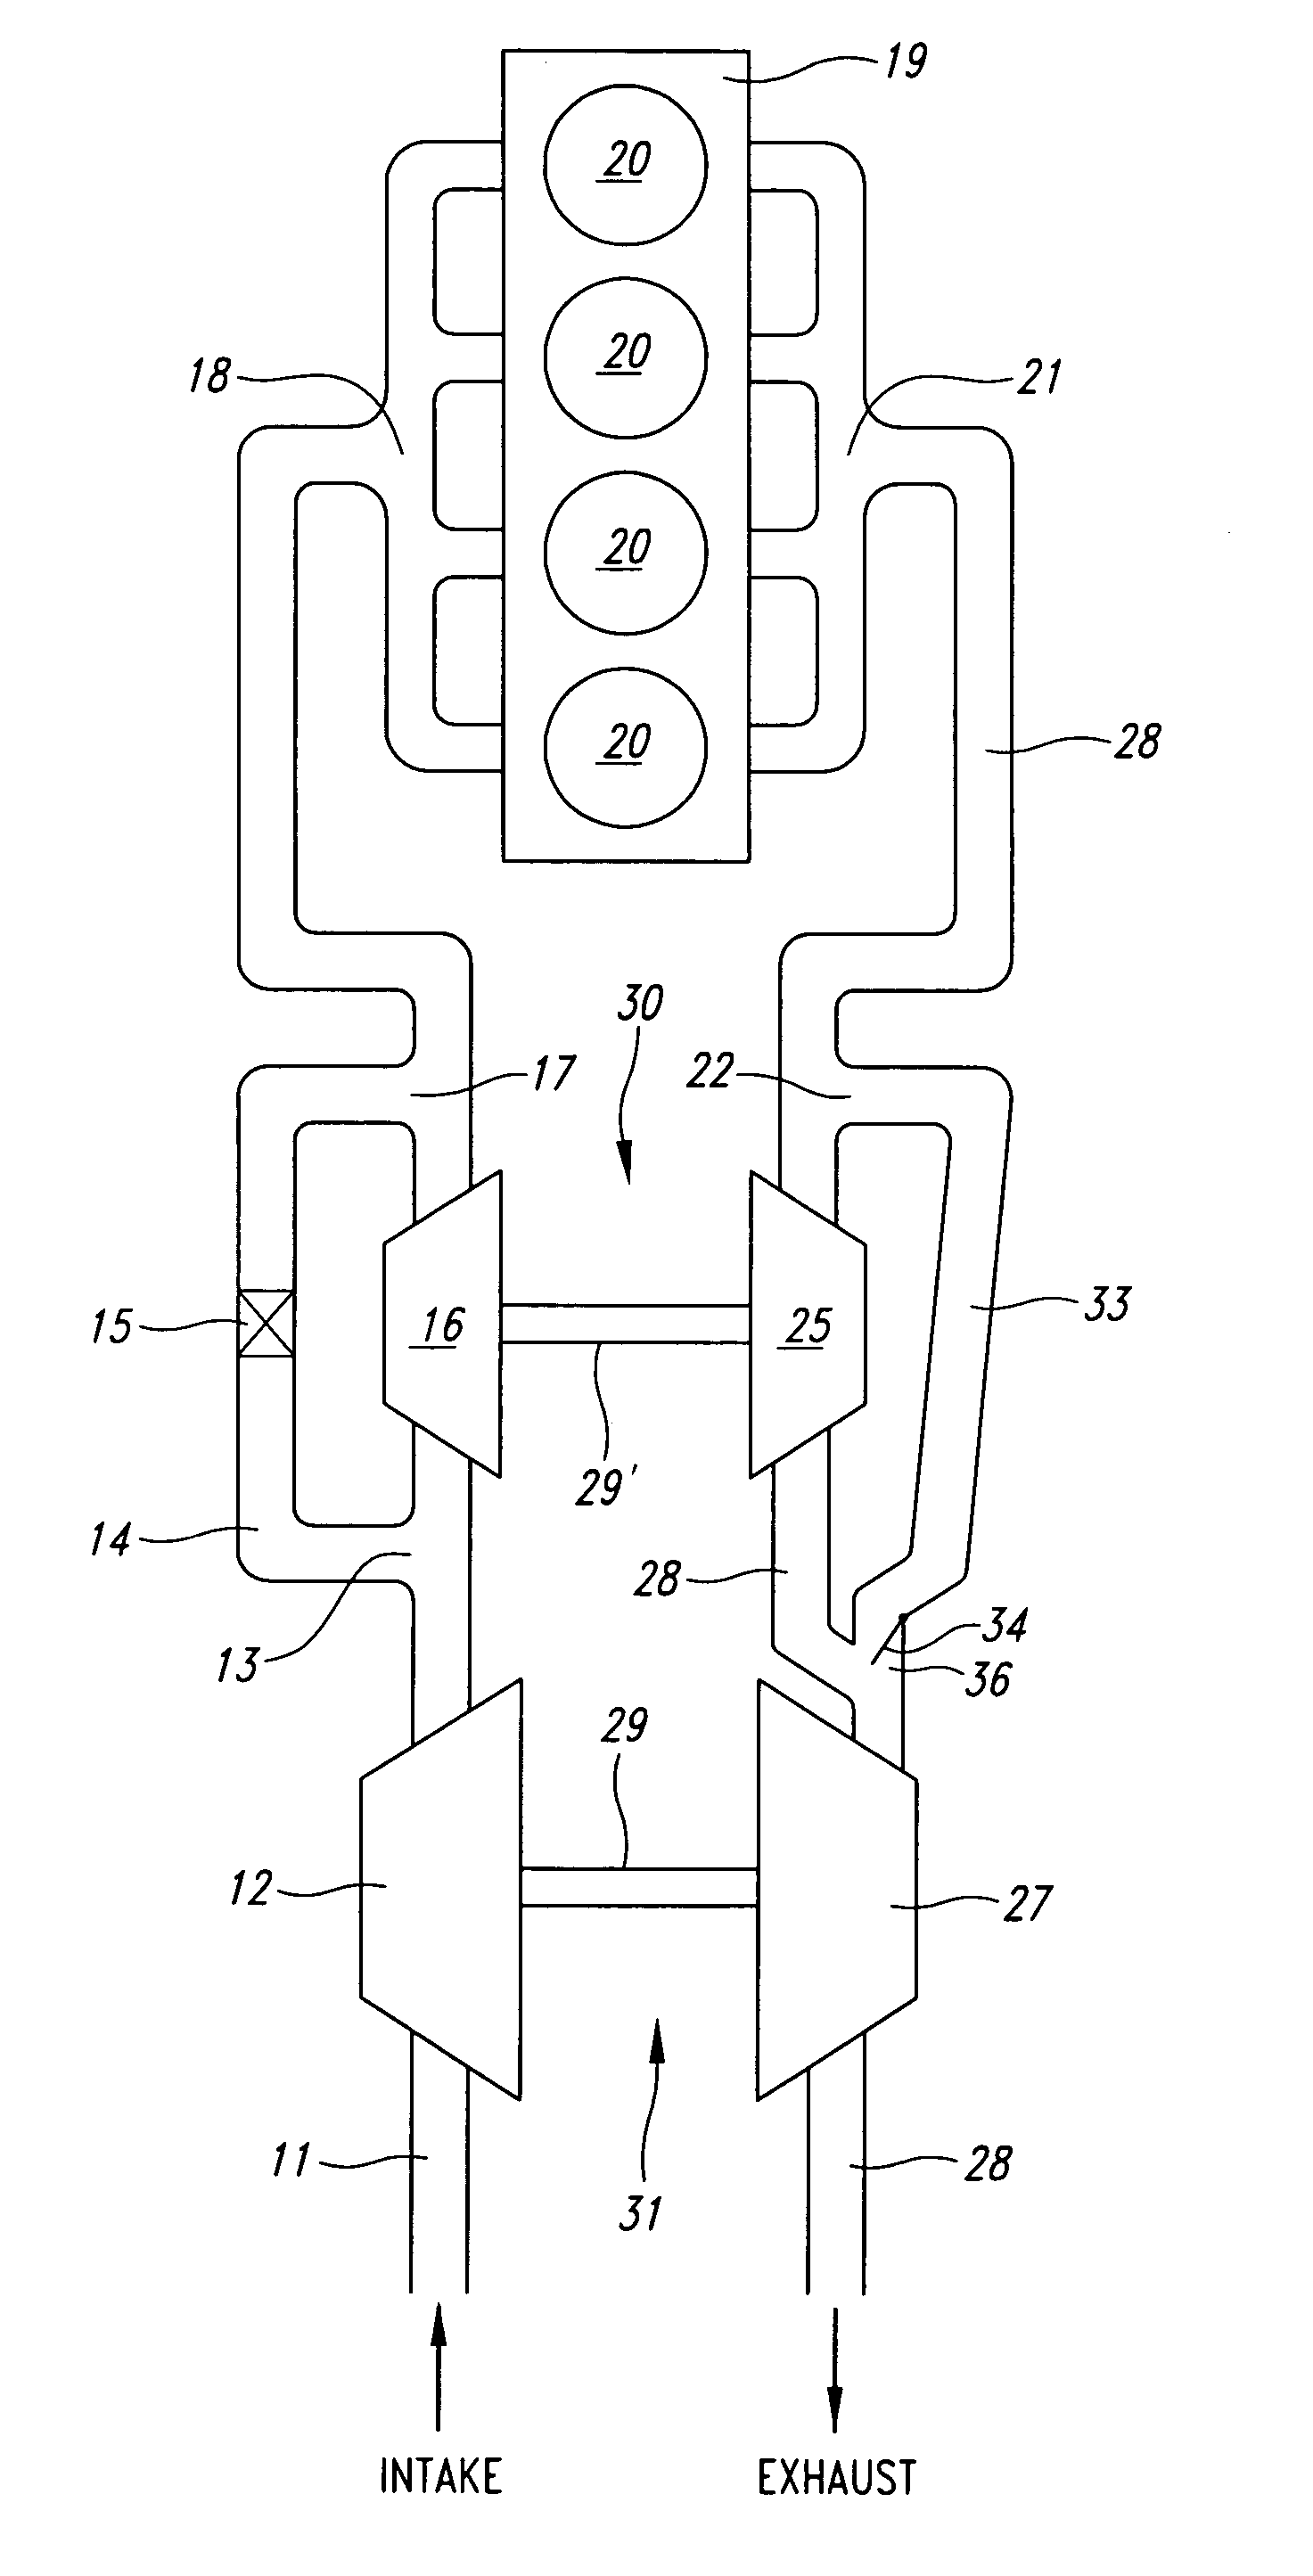 Efficient bypass valve for multi-stage turbocharging system